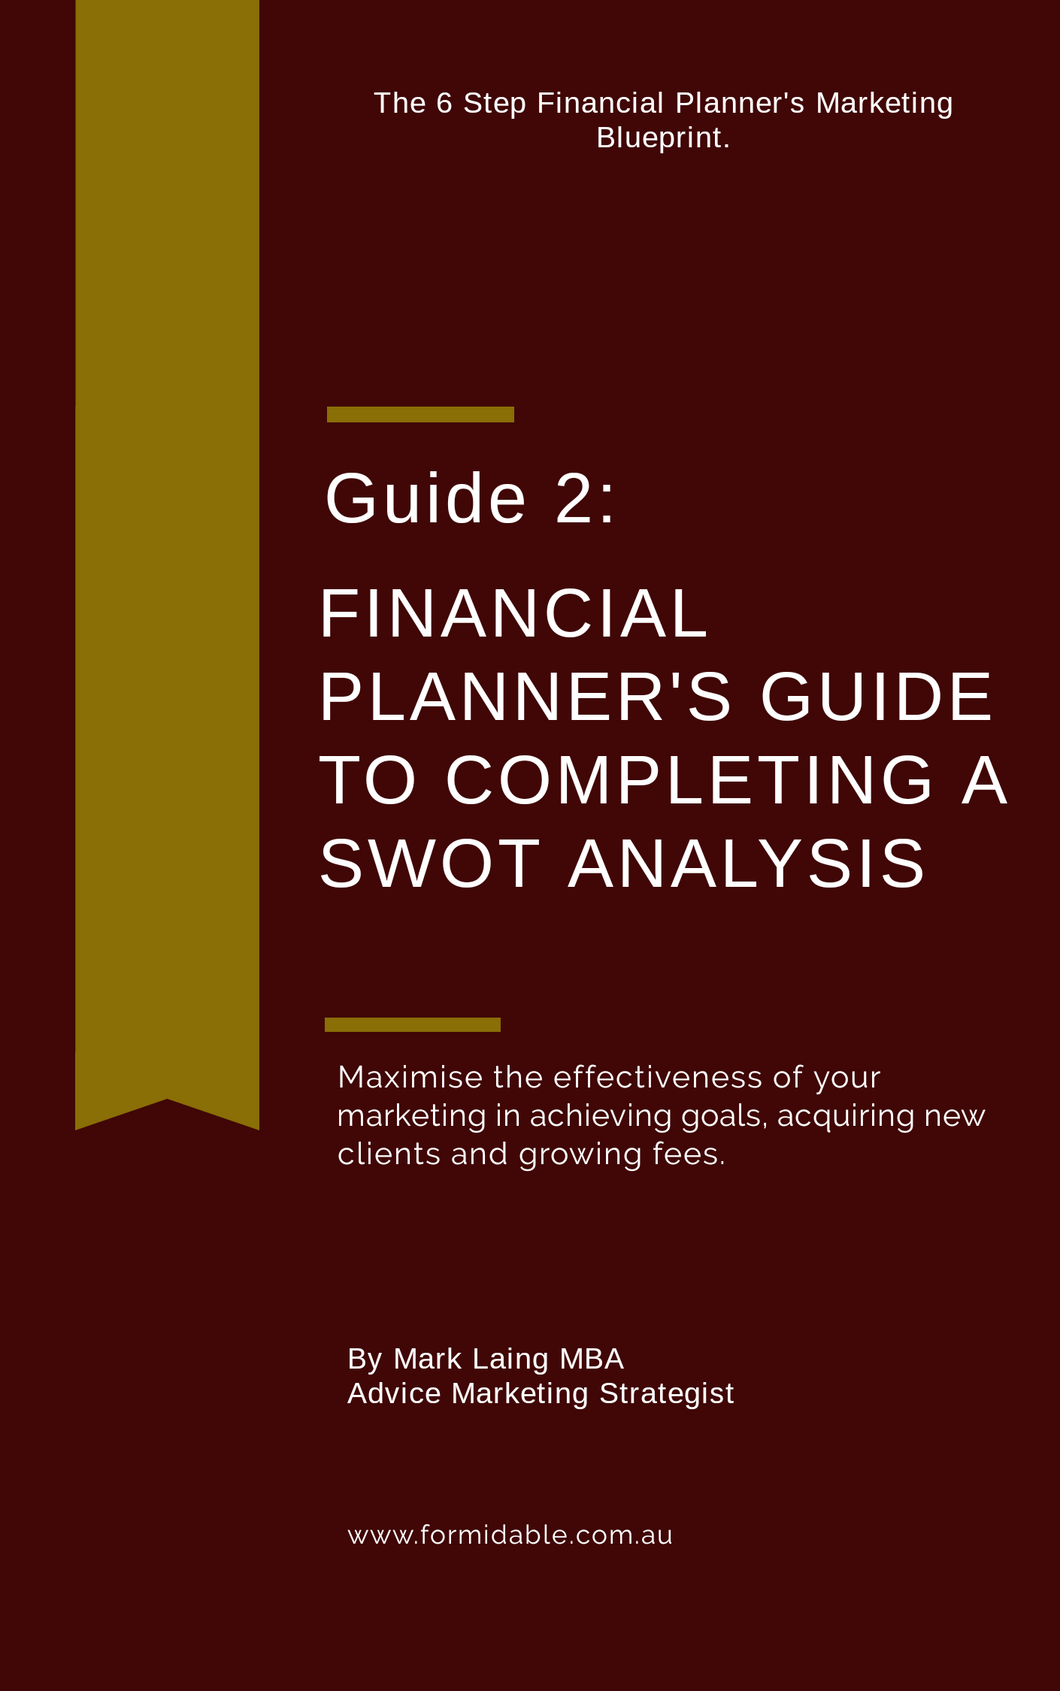 Guide 2: Financial Planner's Guide to Completing a SWOT Analysis